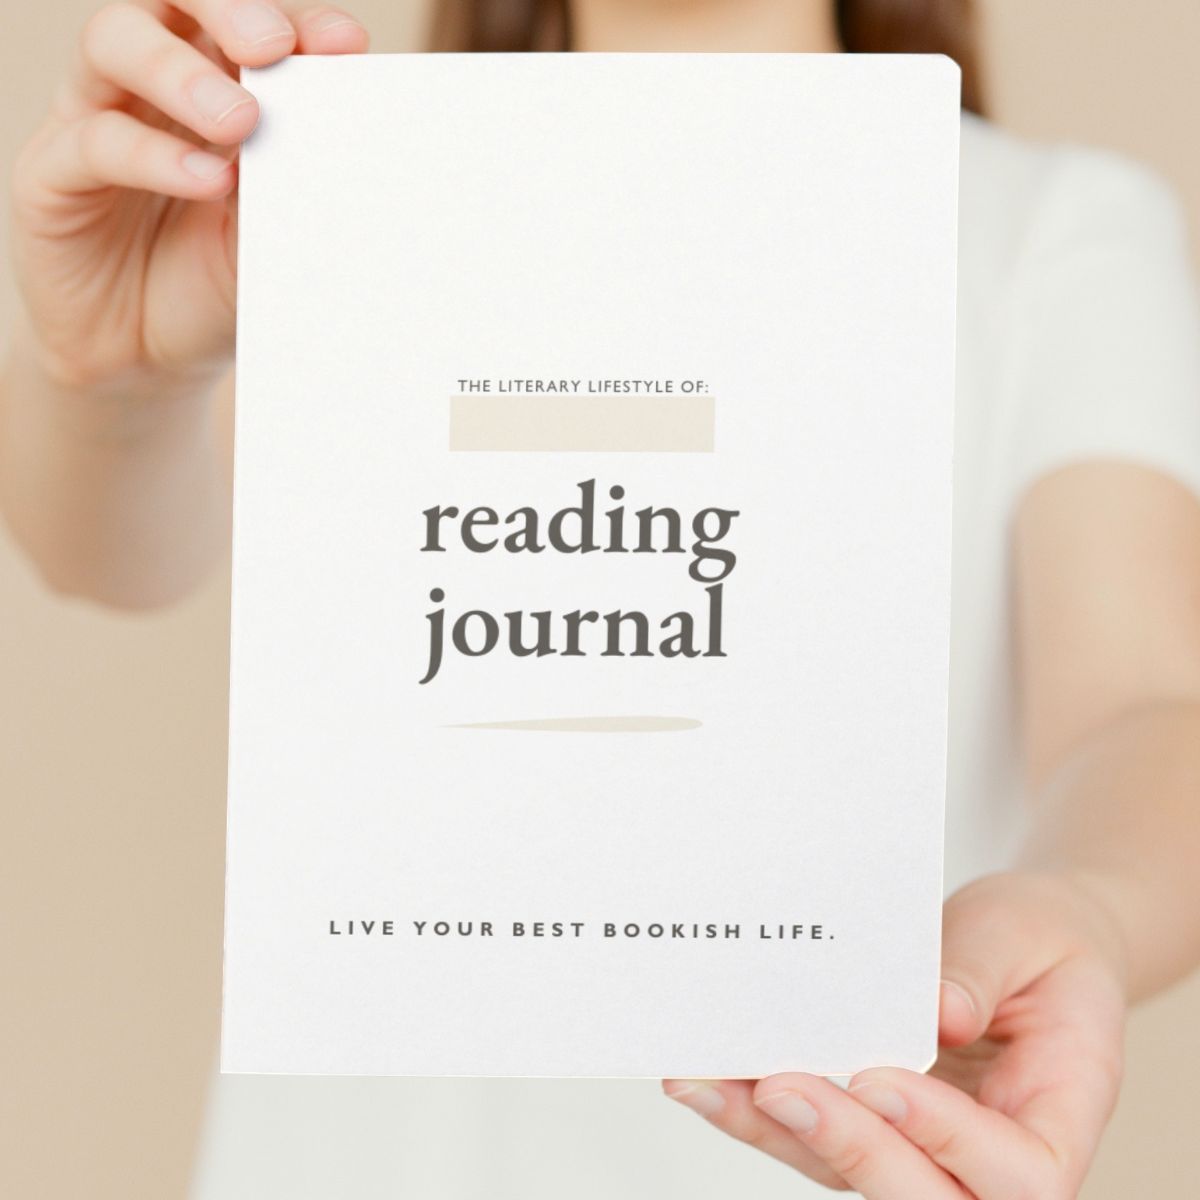 reading-journal-the-literary-lifestyle